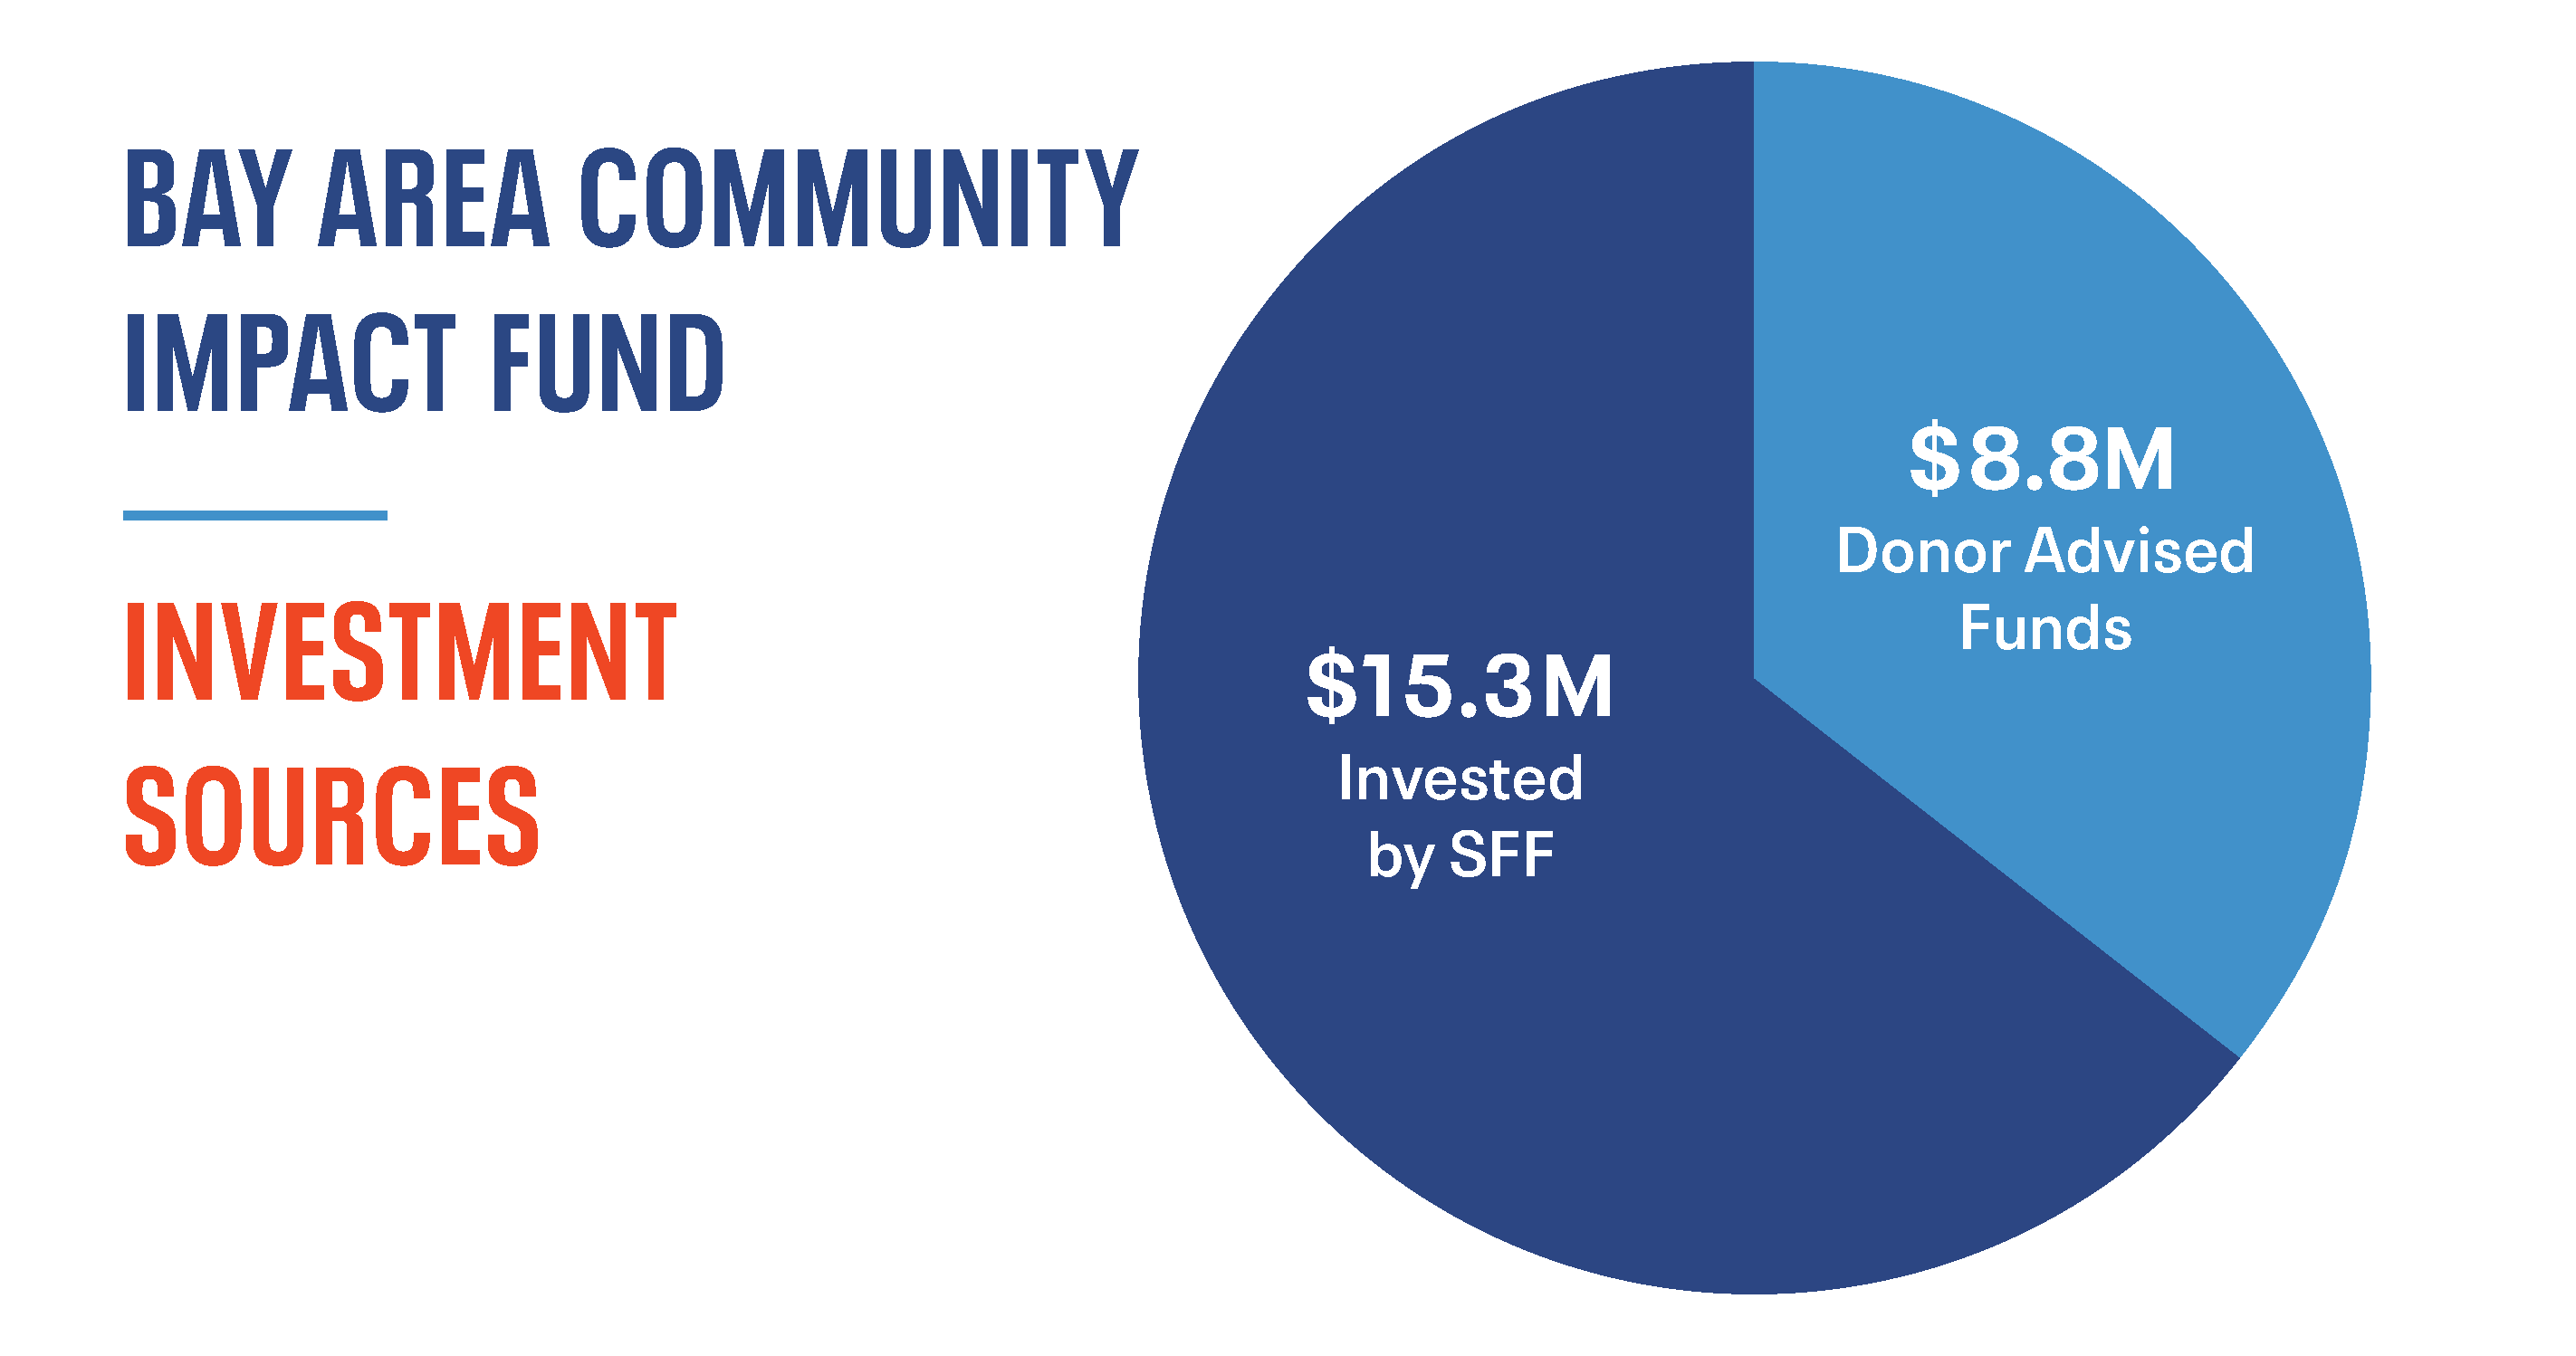 2022 BACIF Bay Area Community Impact Fund Investment Sources